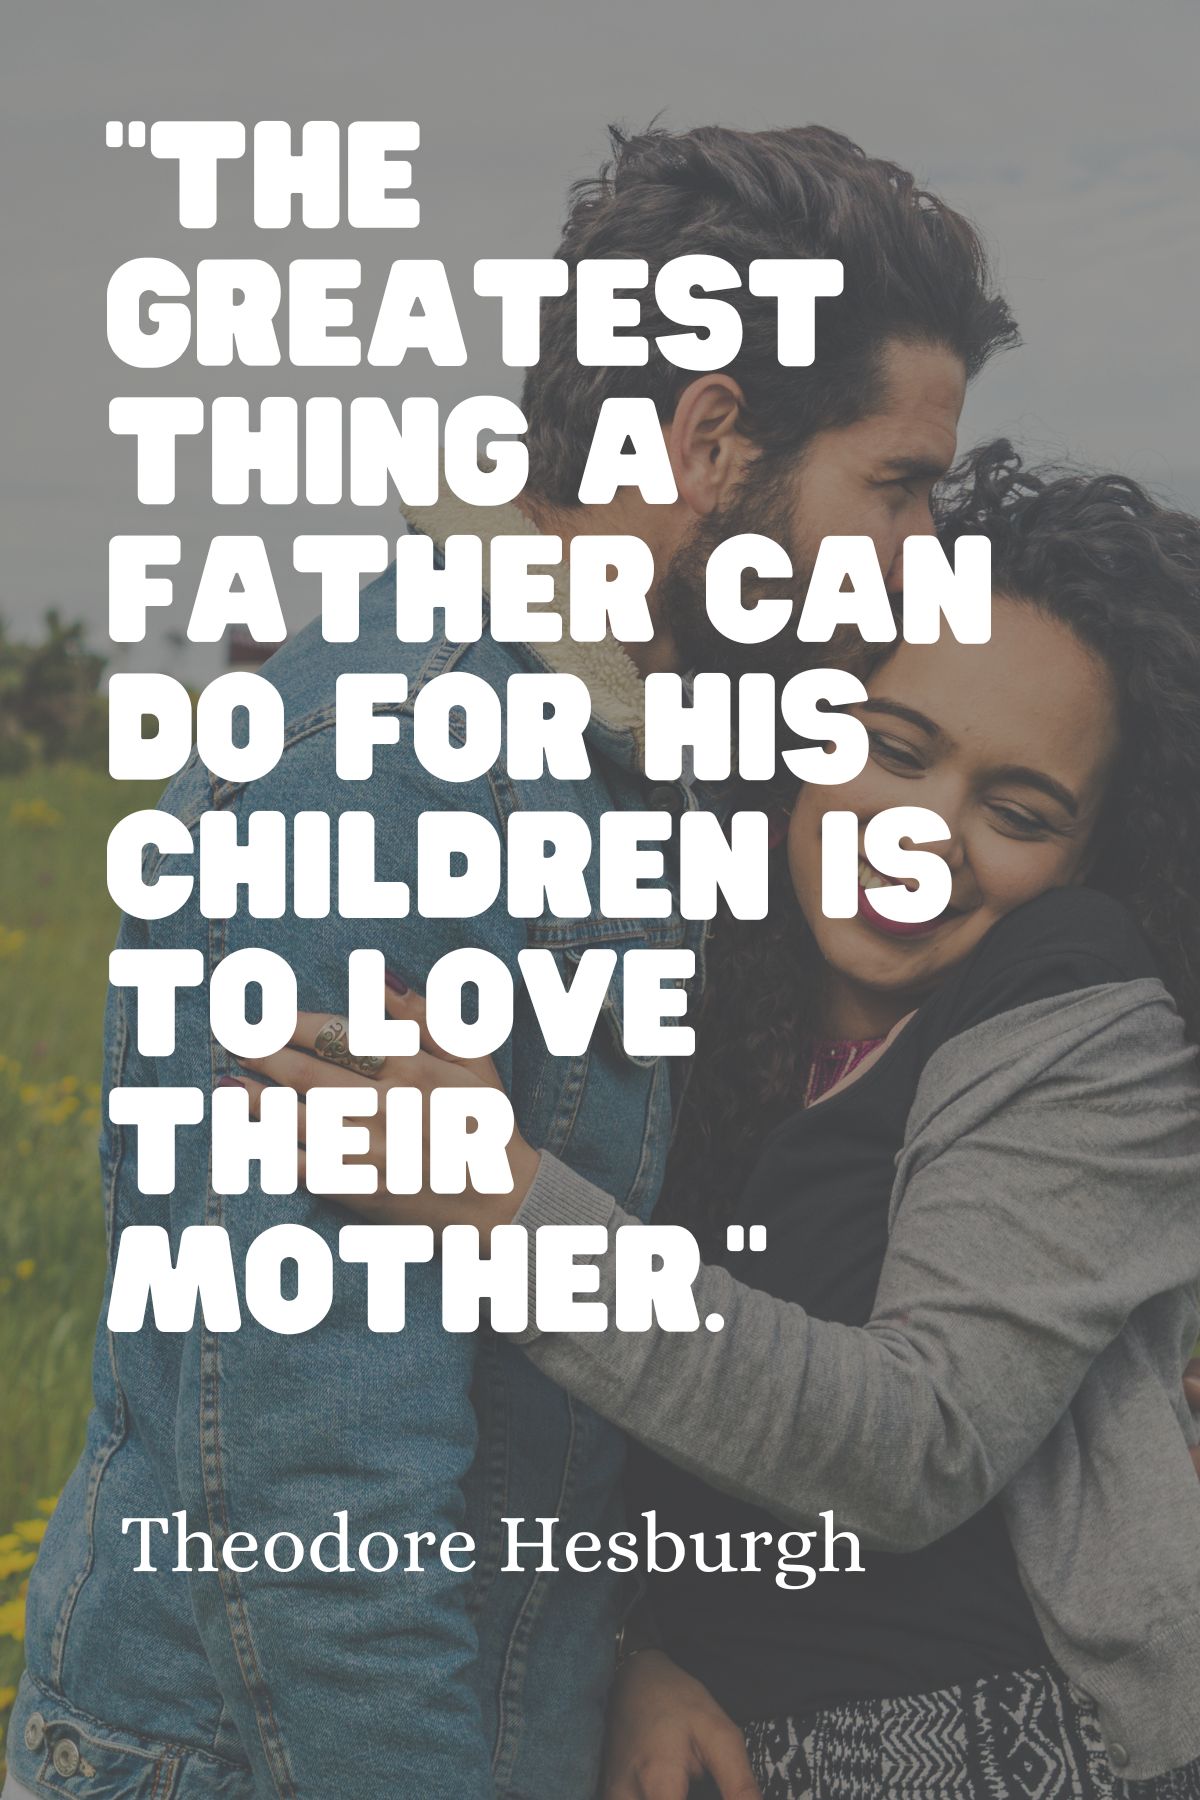 "The greatest thing a father can do for his children is to love their mother." – Theodore Hesburgh